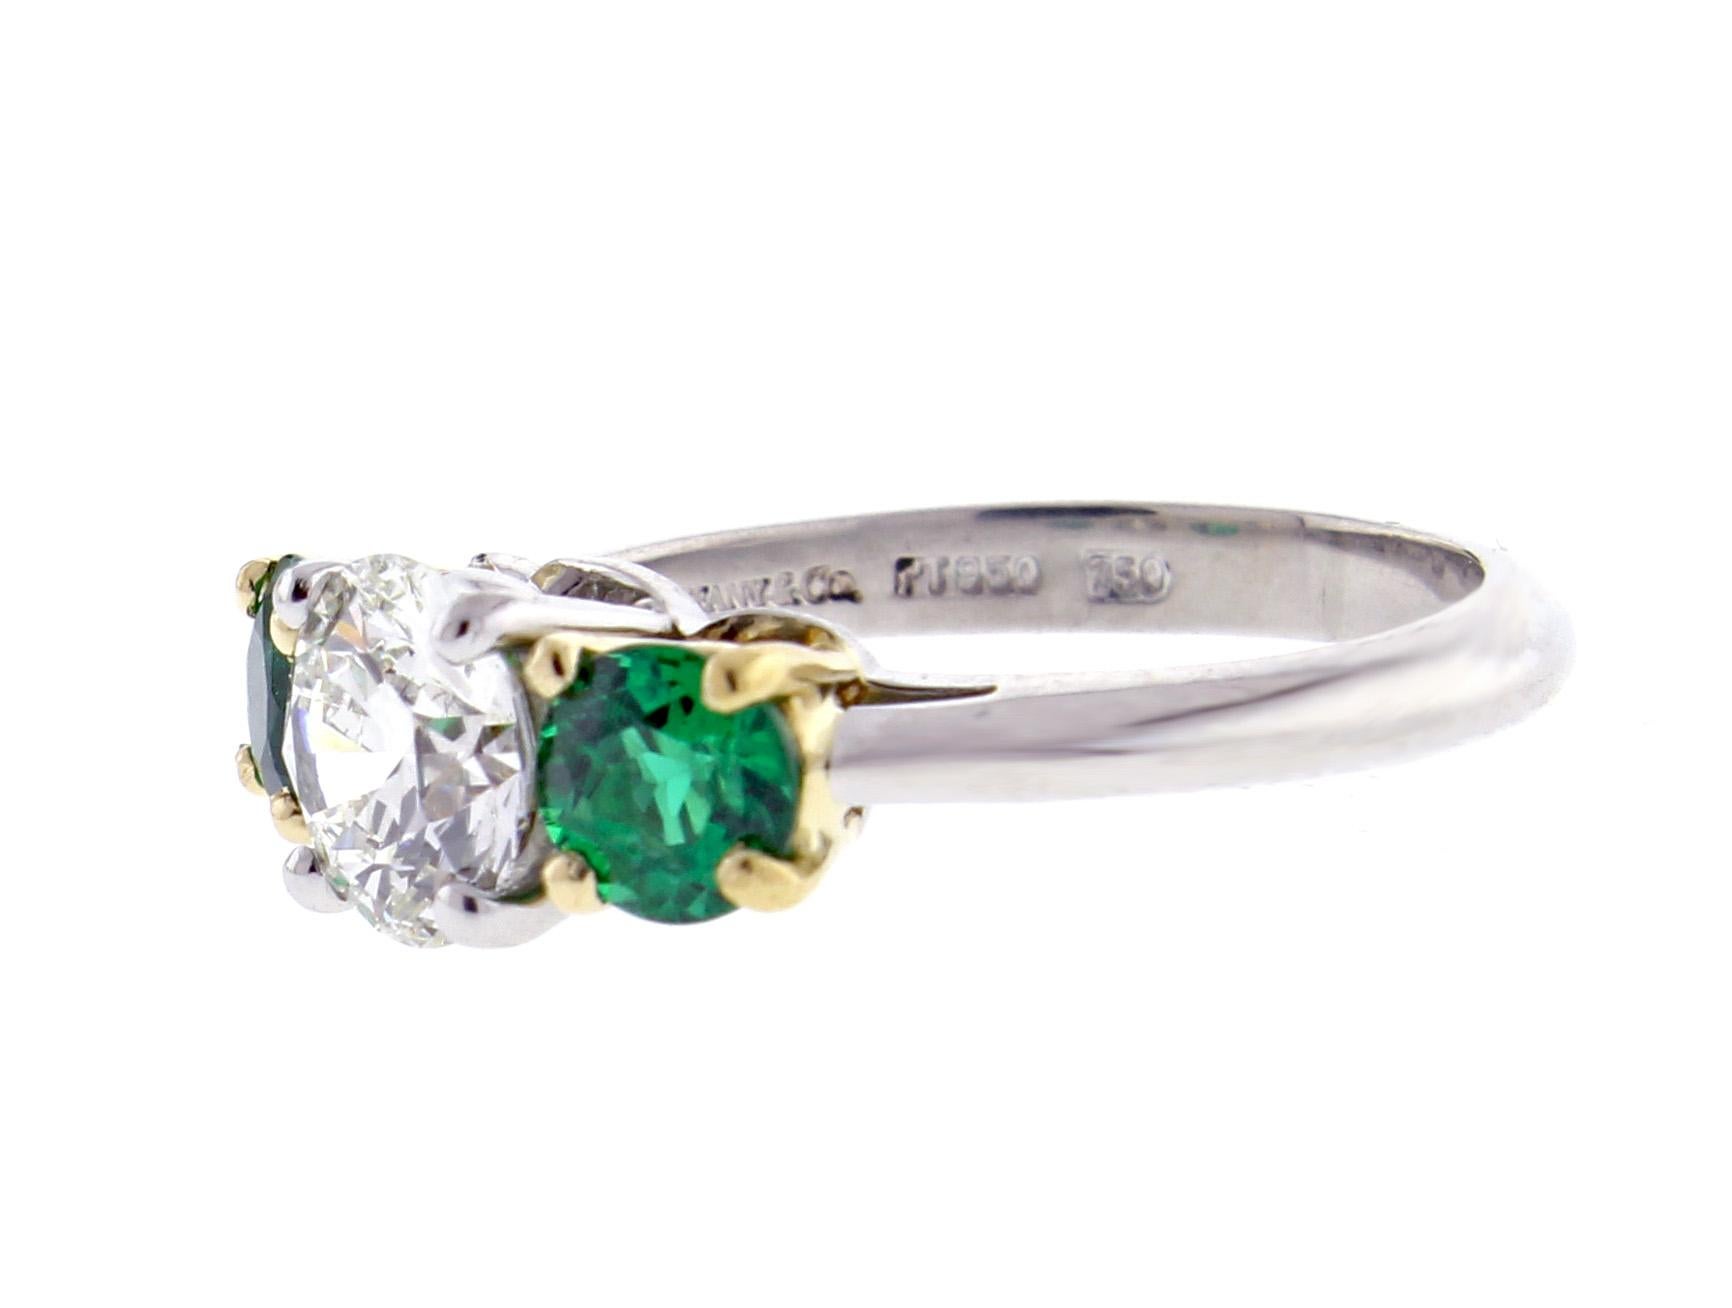 From Tiffany & Co. a Diamond and Emerald Three-stone Ring. The center diamond weighs 1.11 carat, I color and VS1 clarity. The ring is hand made in platinum and 18 karat gold. The two emerald are exceedingly fine and have been fully re-polished.

♦